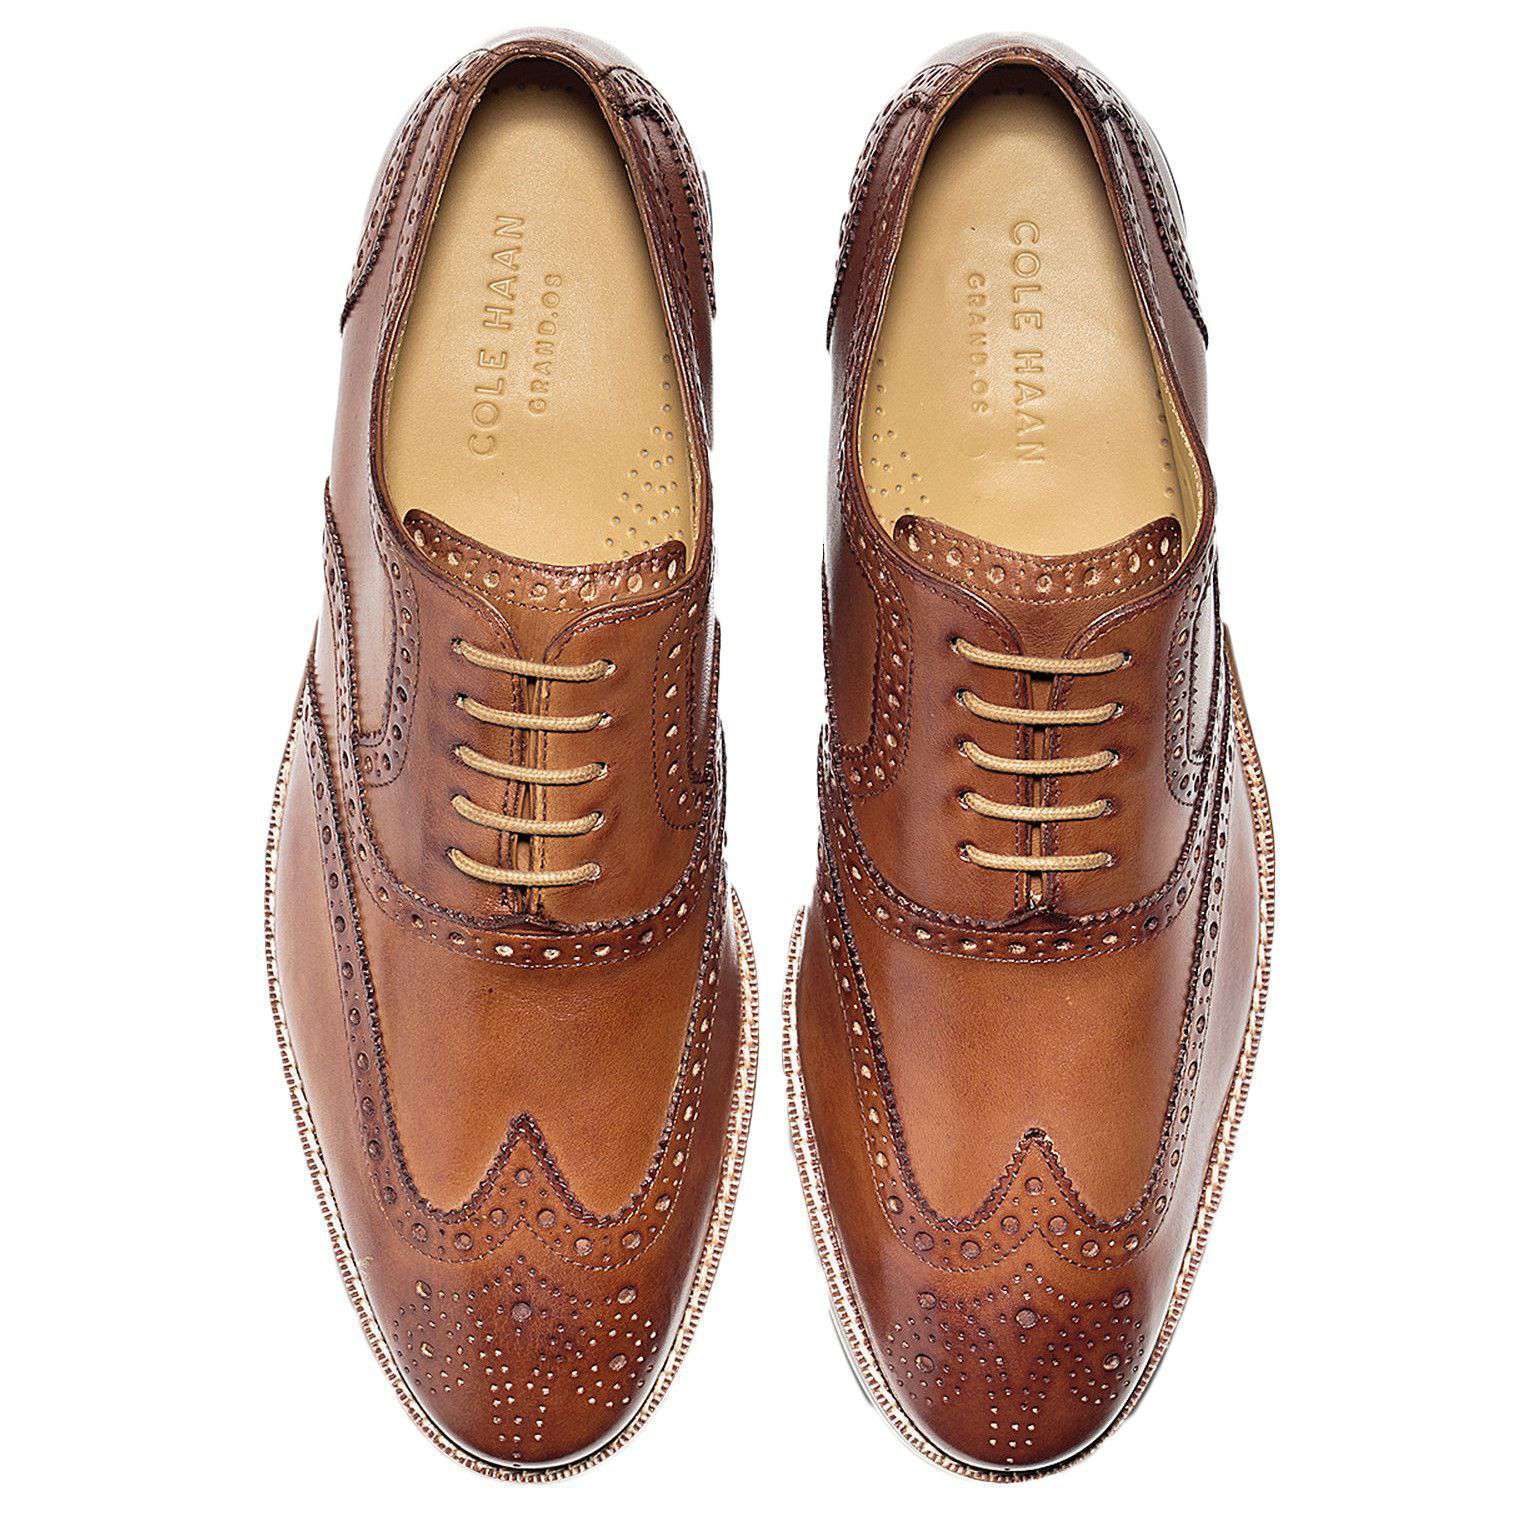 Men's Cambridge Wing Oxford in British Tan by Cole Haan - Country Club Prep